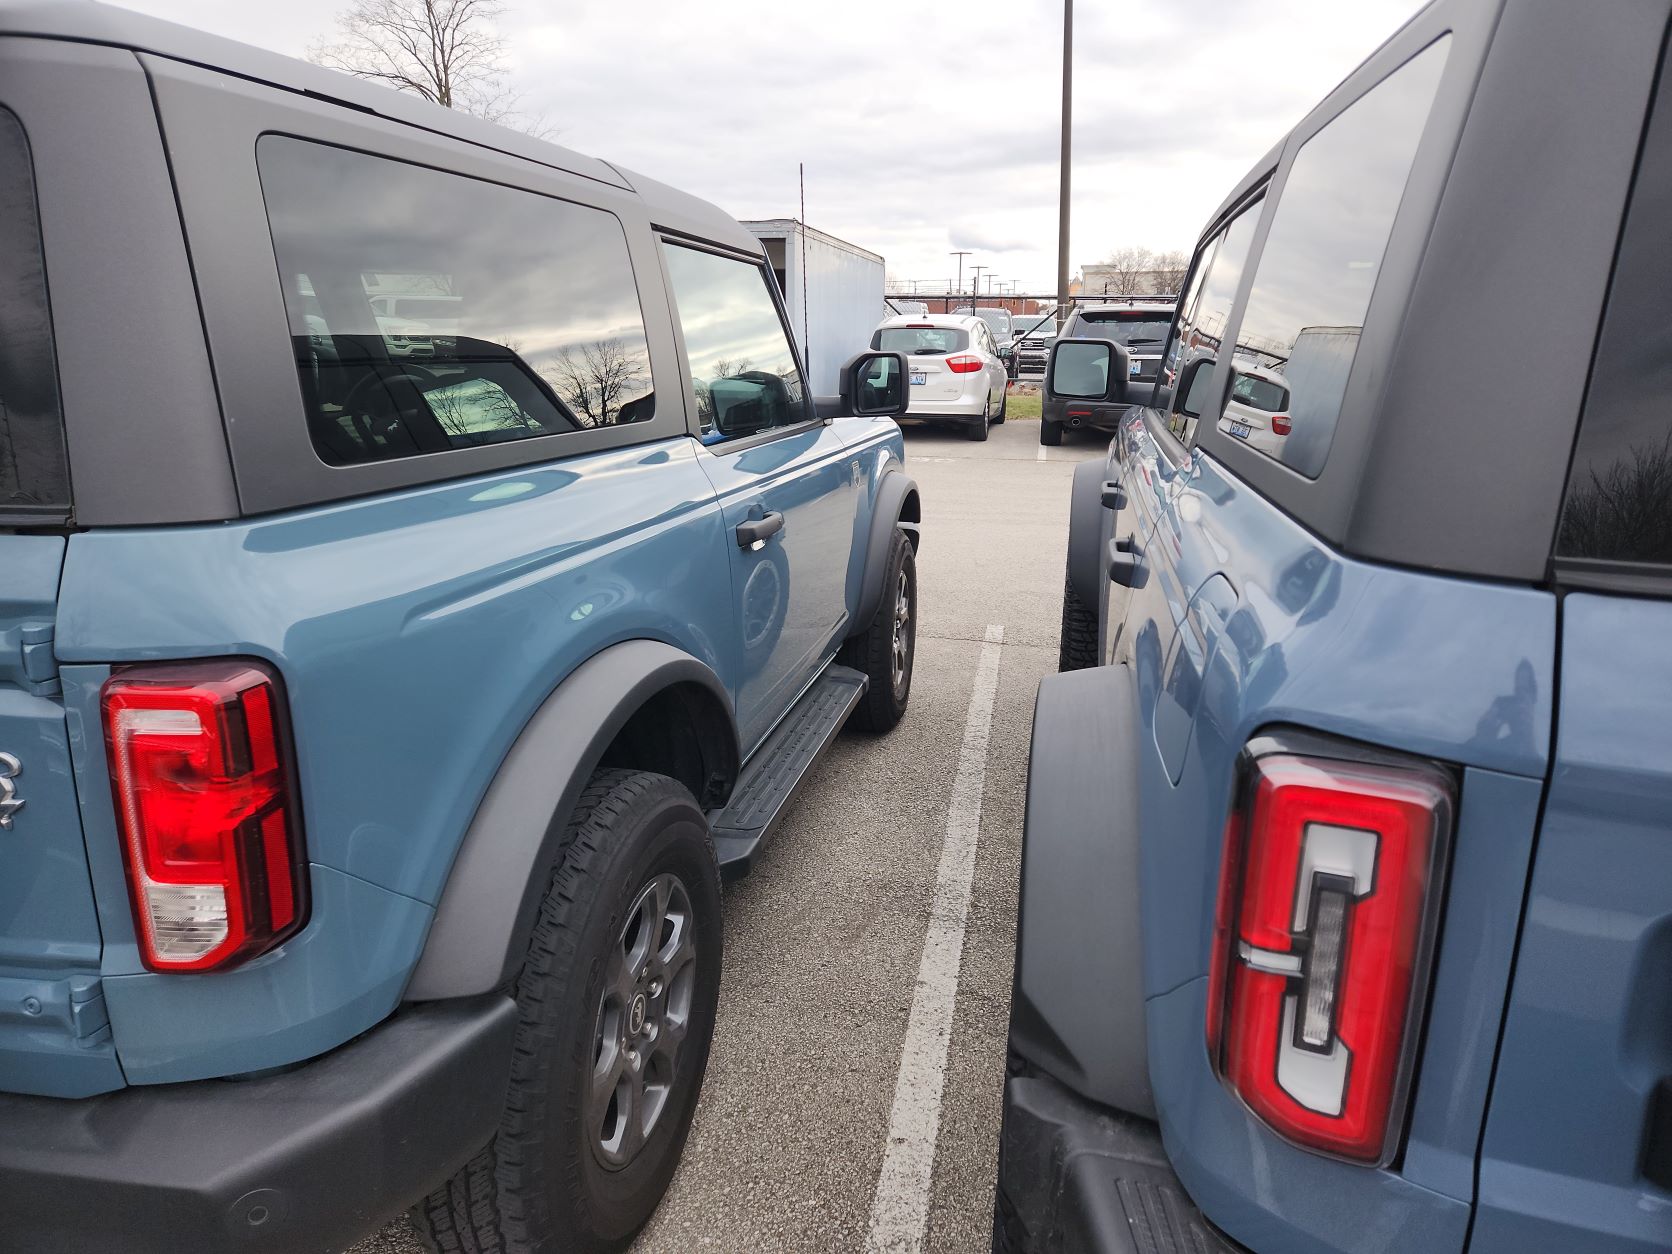 Ford Bronco Azure Gray vs Area 51 colors side-by-side comparison pics + AGM in the sun 1671468333225